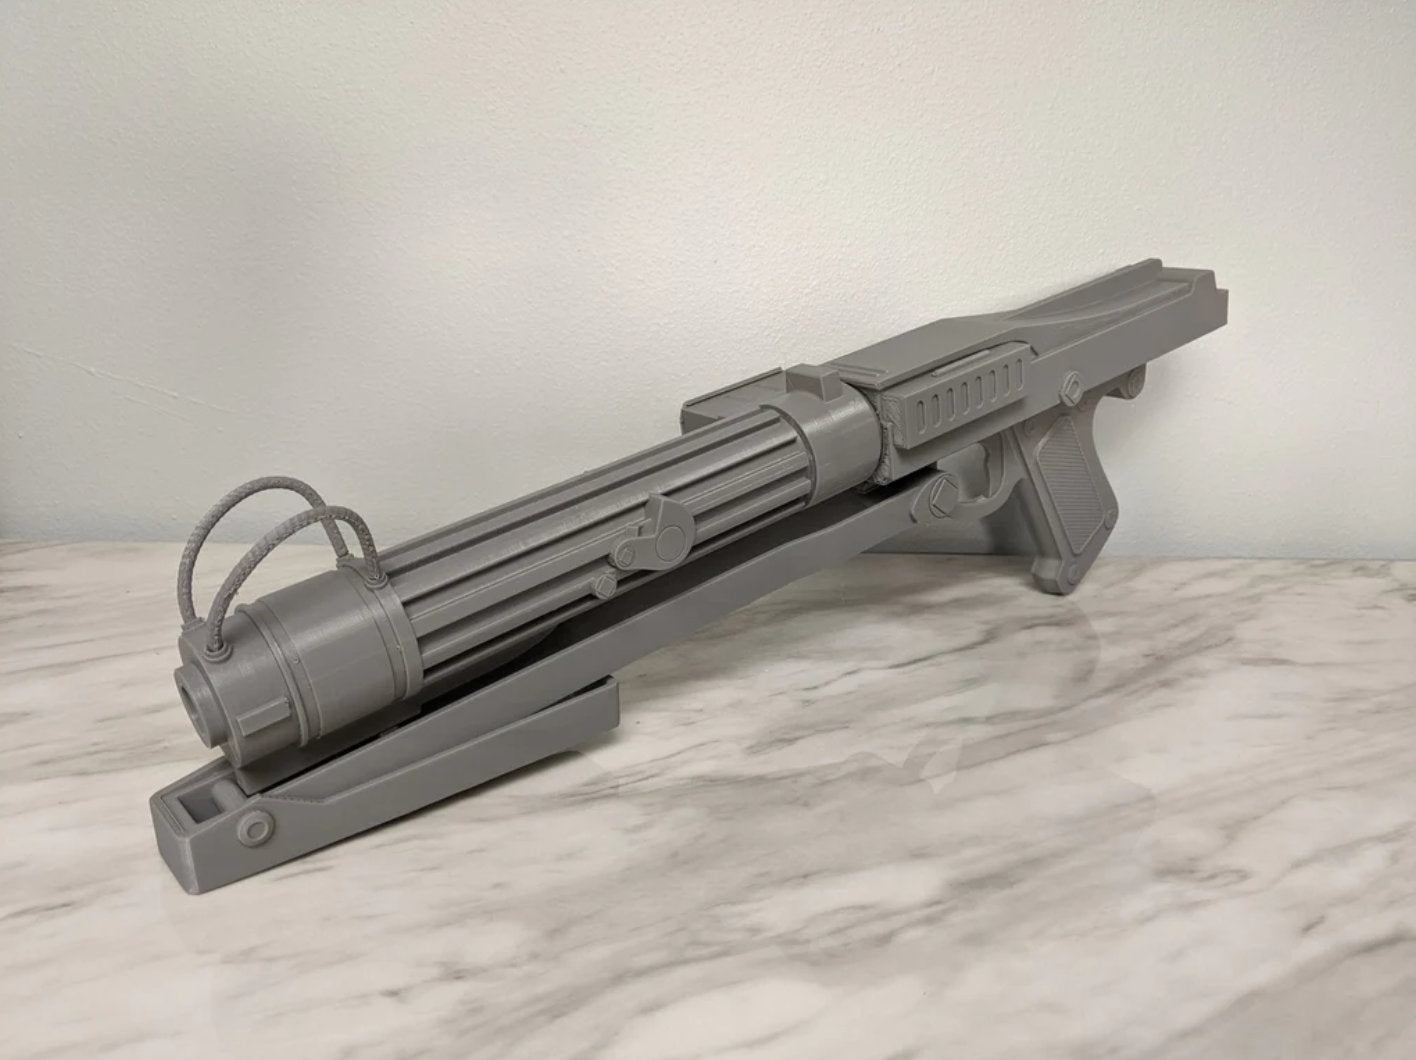 DC-15S Blaster Replica - 3D Printed Prop For Cosplay & Display